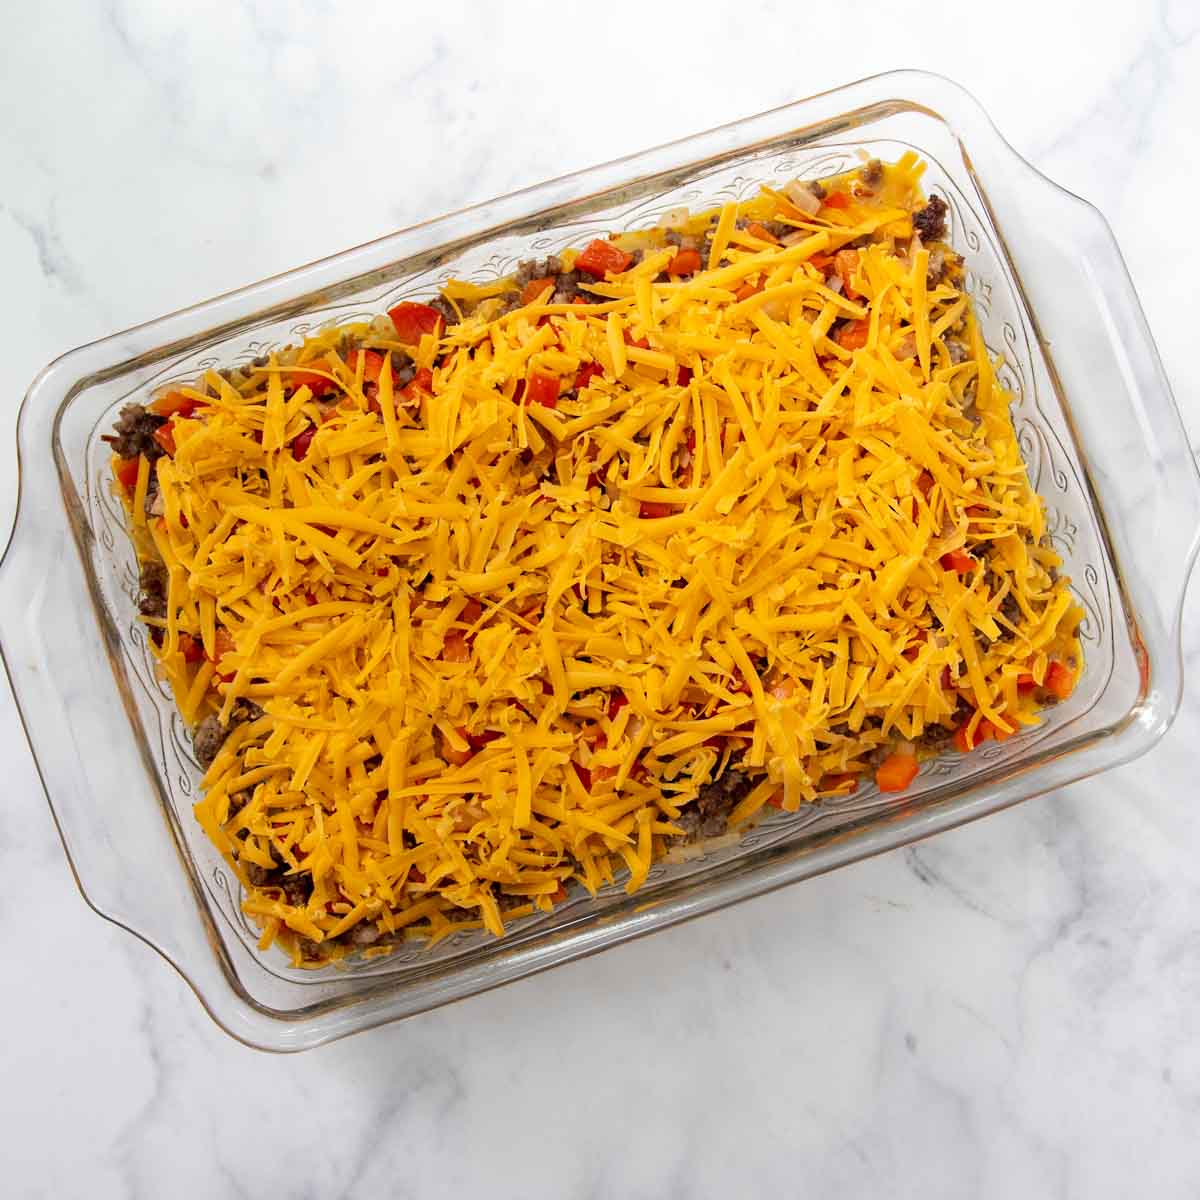 unbaked casserole with cheese on top.